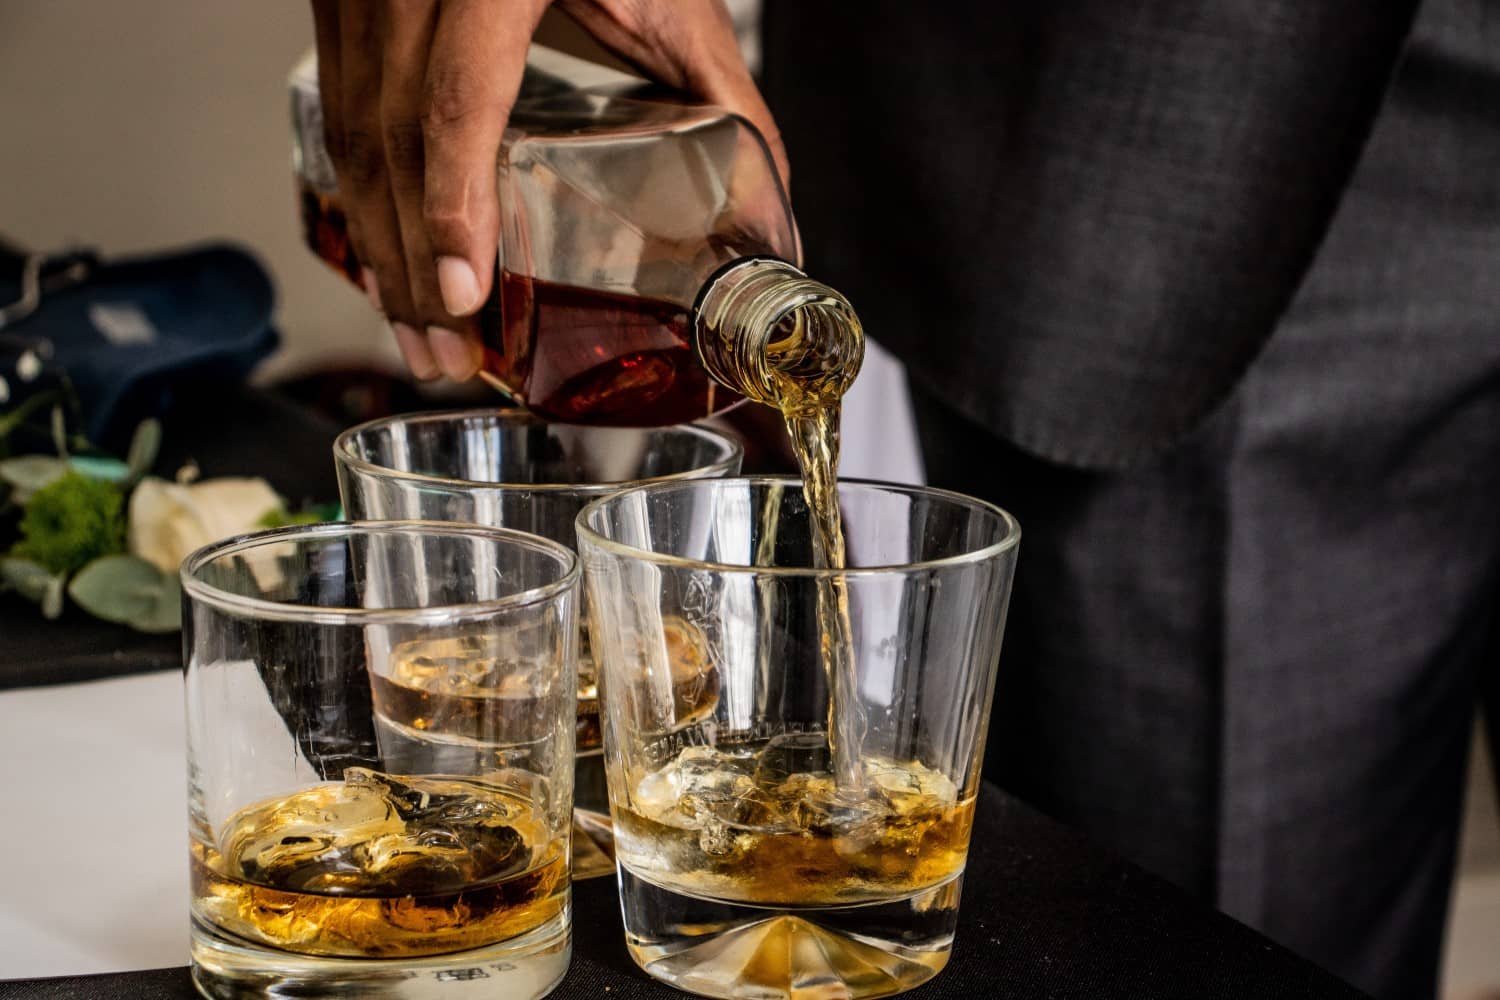 Questioning about how to serve whiskey? Here's 5 most popular ways to do it